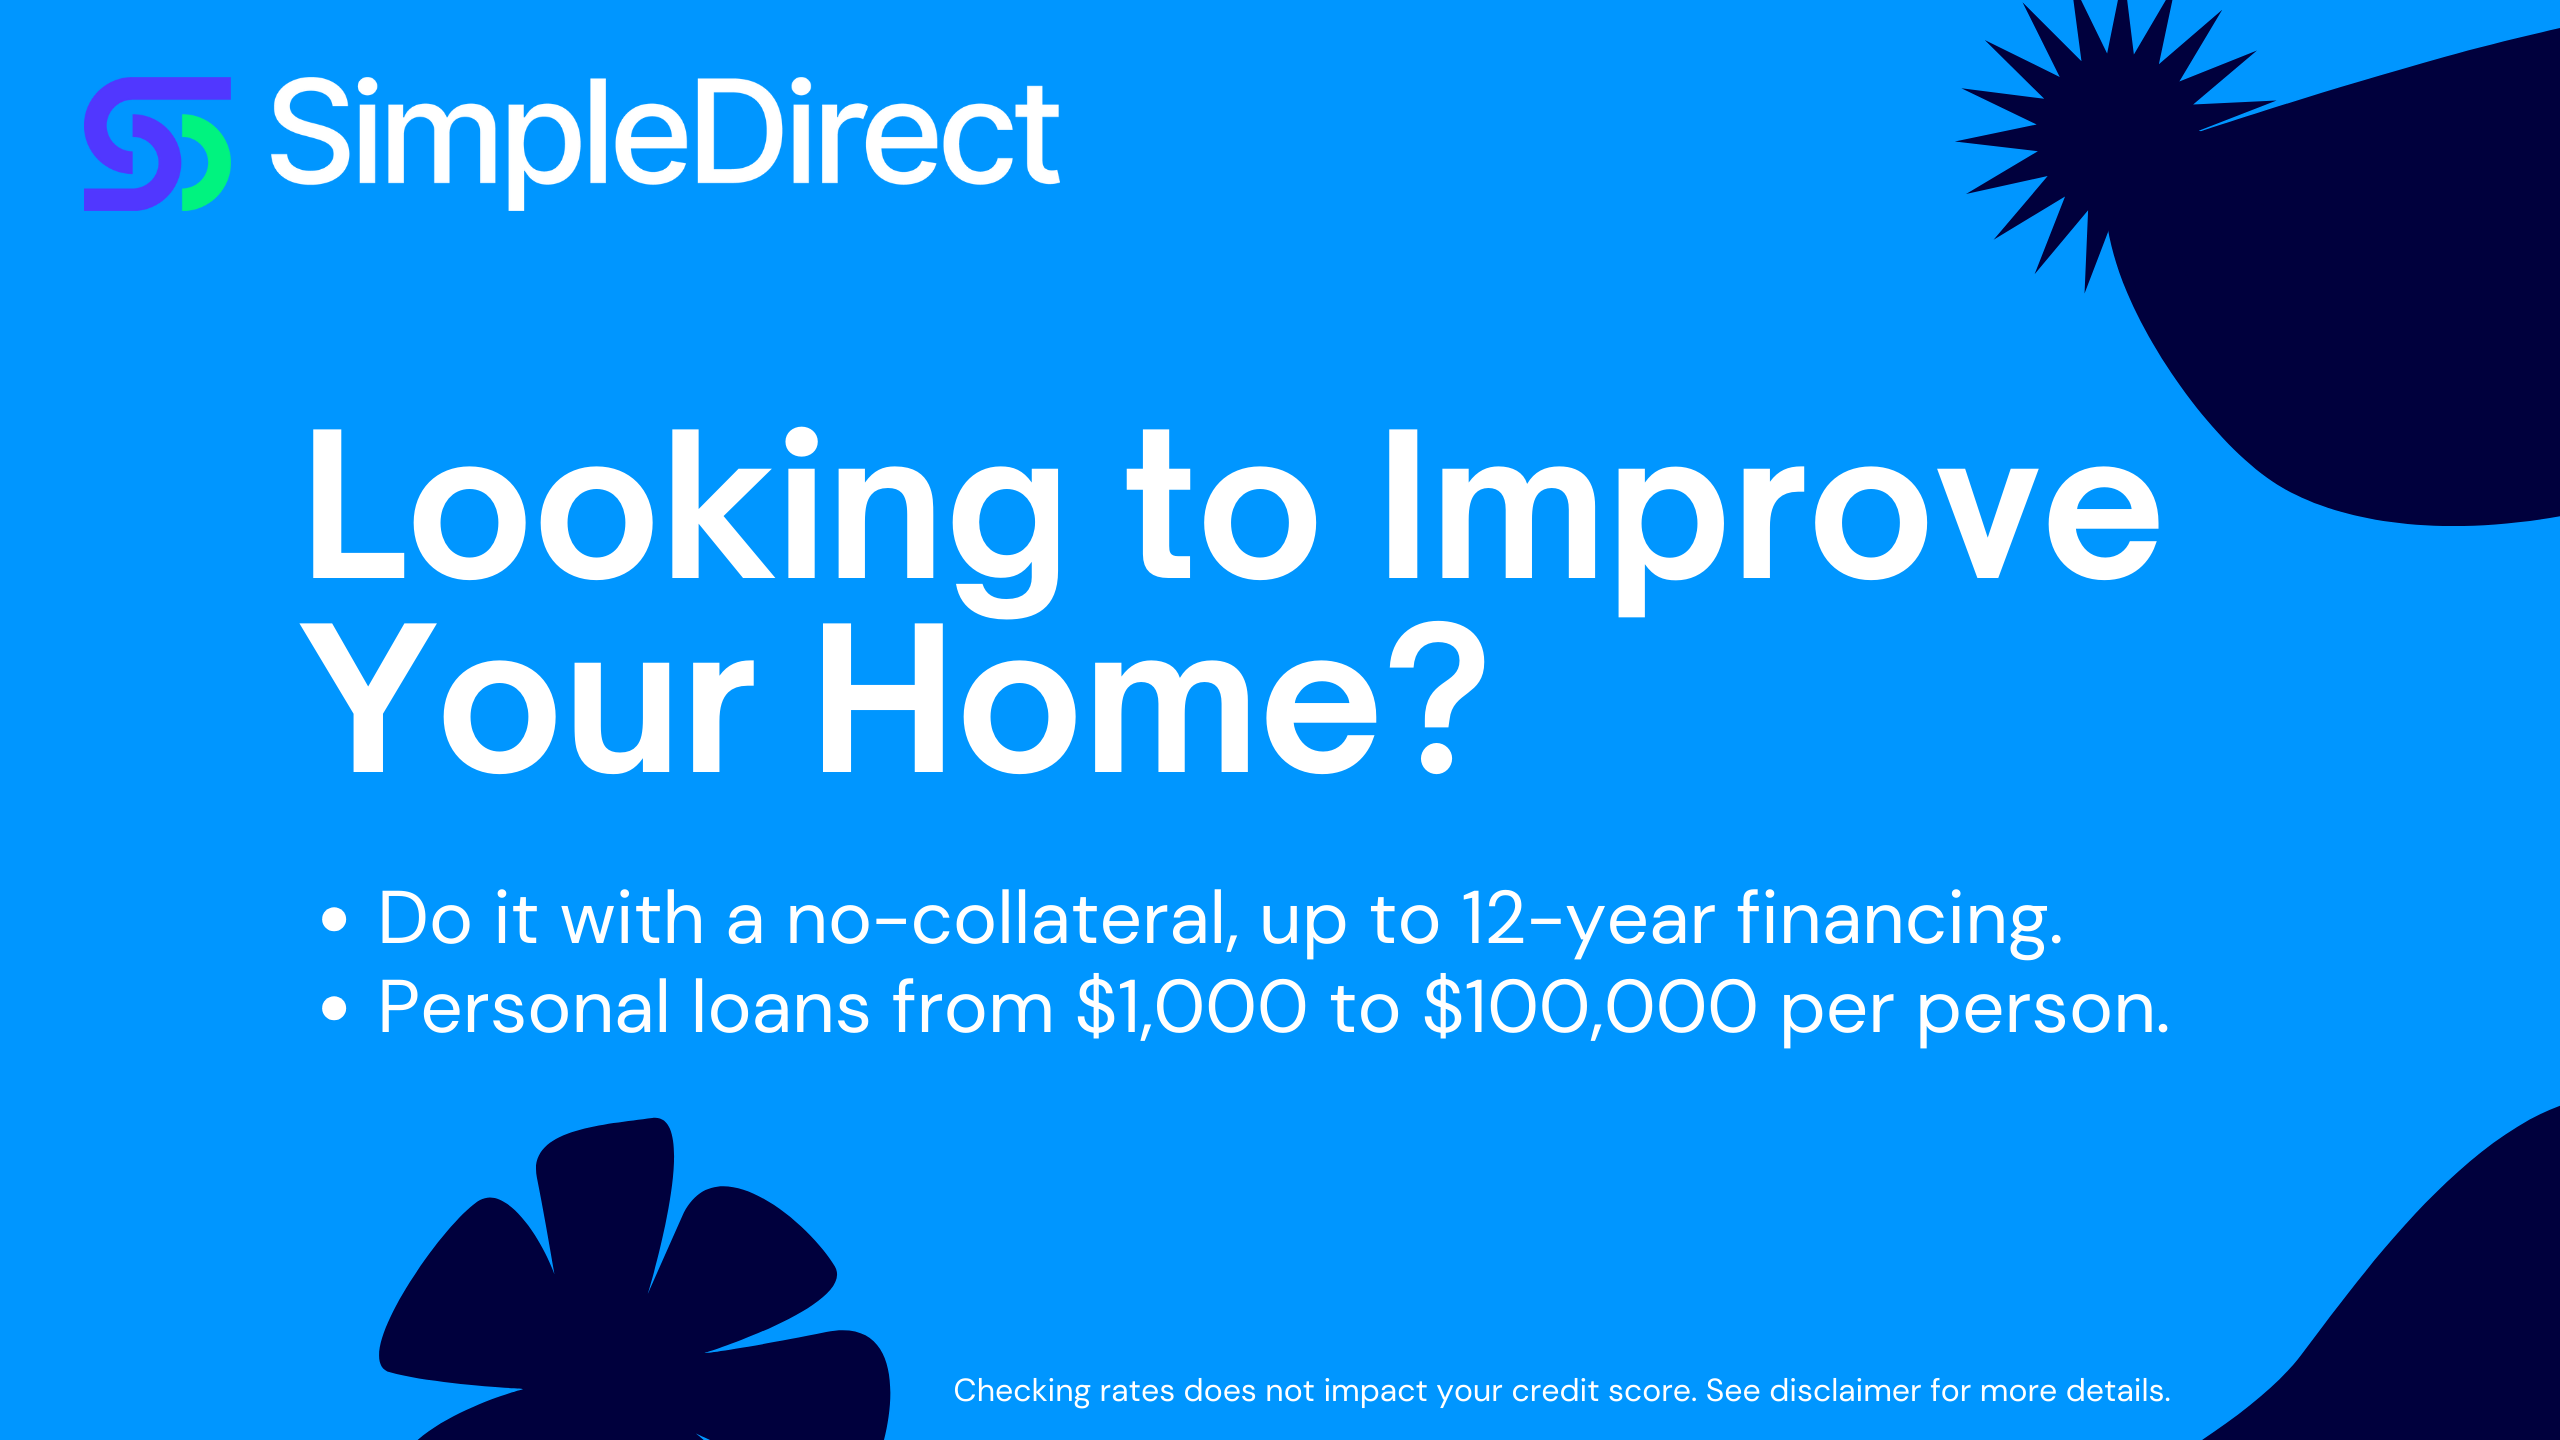 if you are looking to improve your home, consider a no-collateral loan like what SimpleDirect is offering